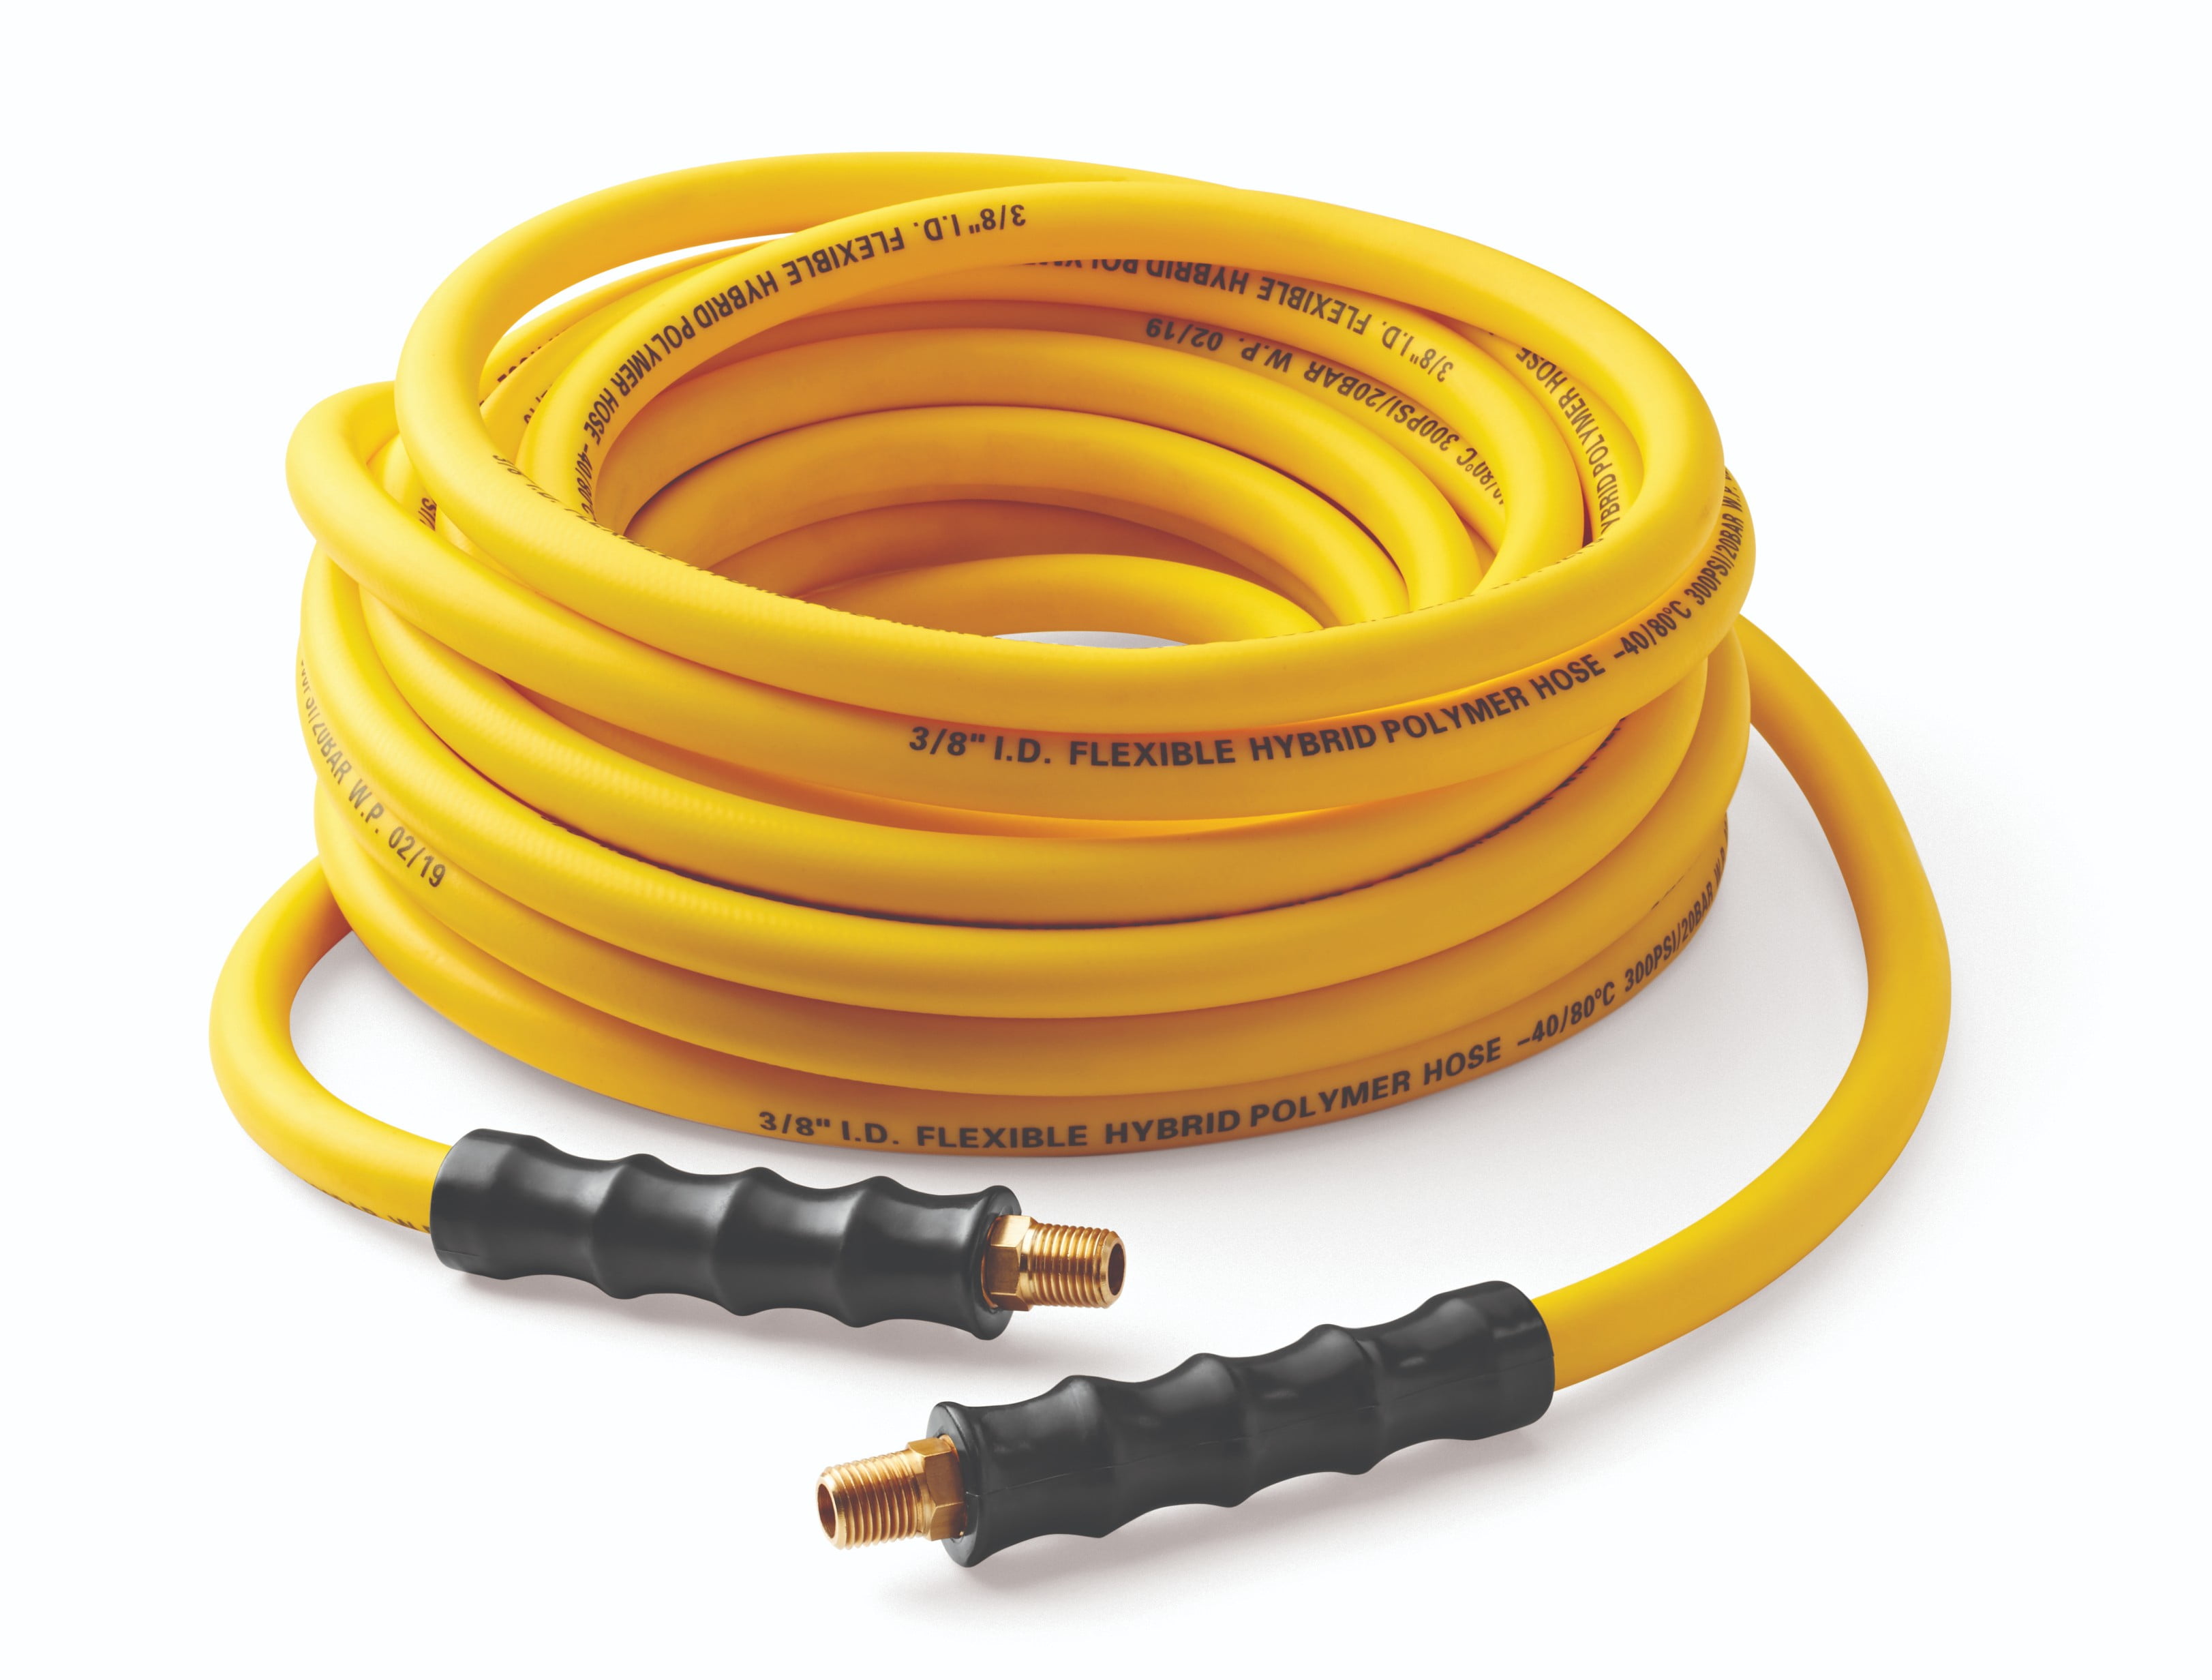 1/8-1/8 Braided Air Hose with Built-In Moisture Trap Filter (3m